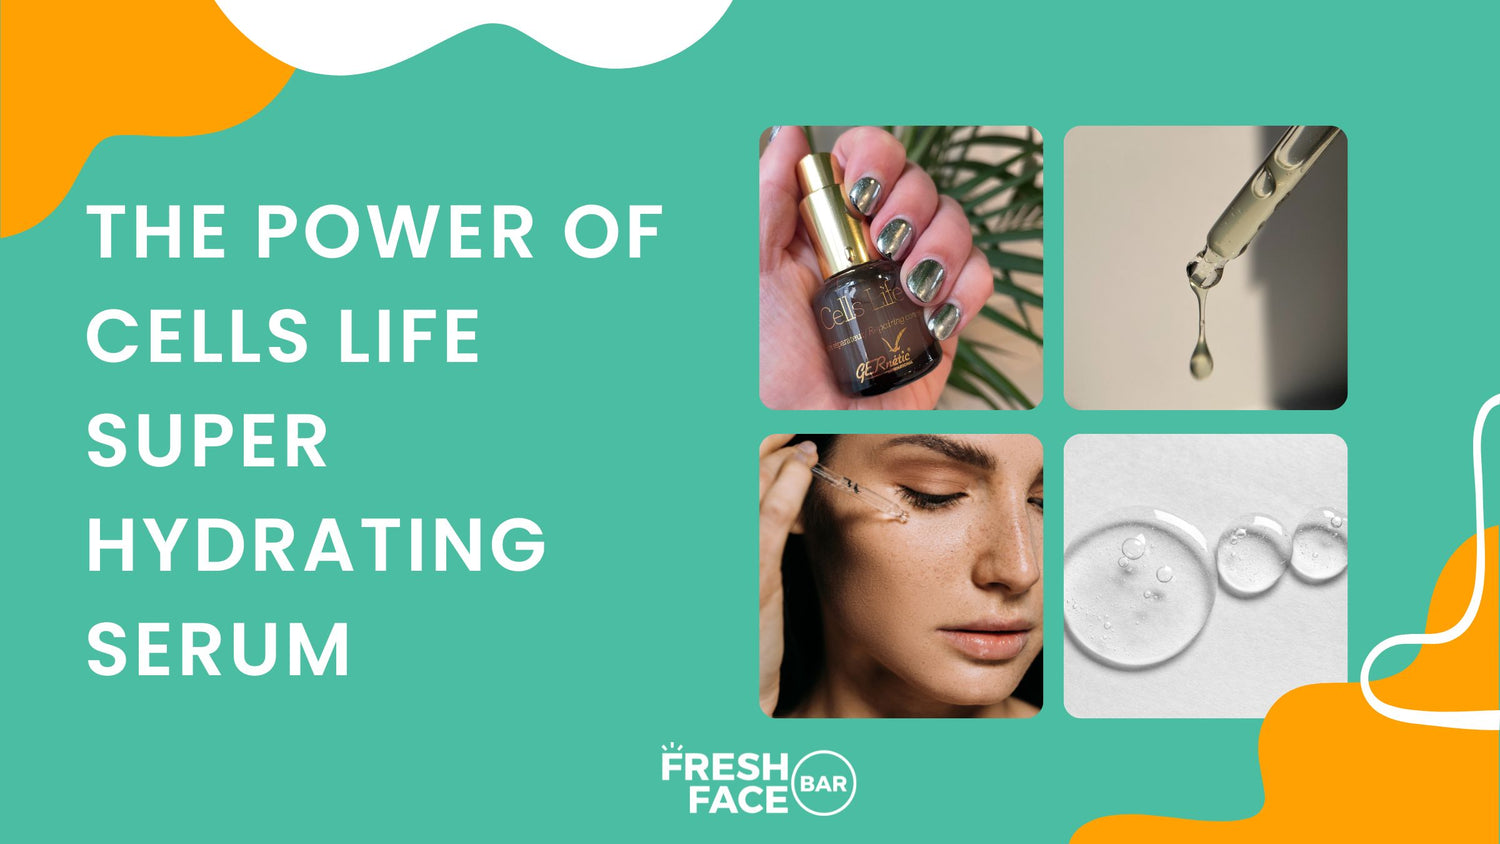 The Power of Cells Life Super Hydrating Serum & Hyaluronic Acid in Your Skincare Routine